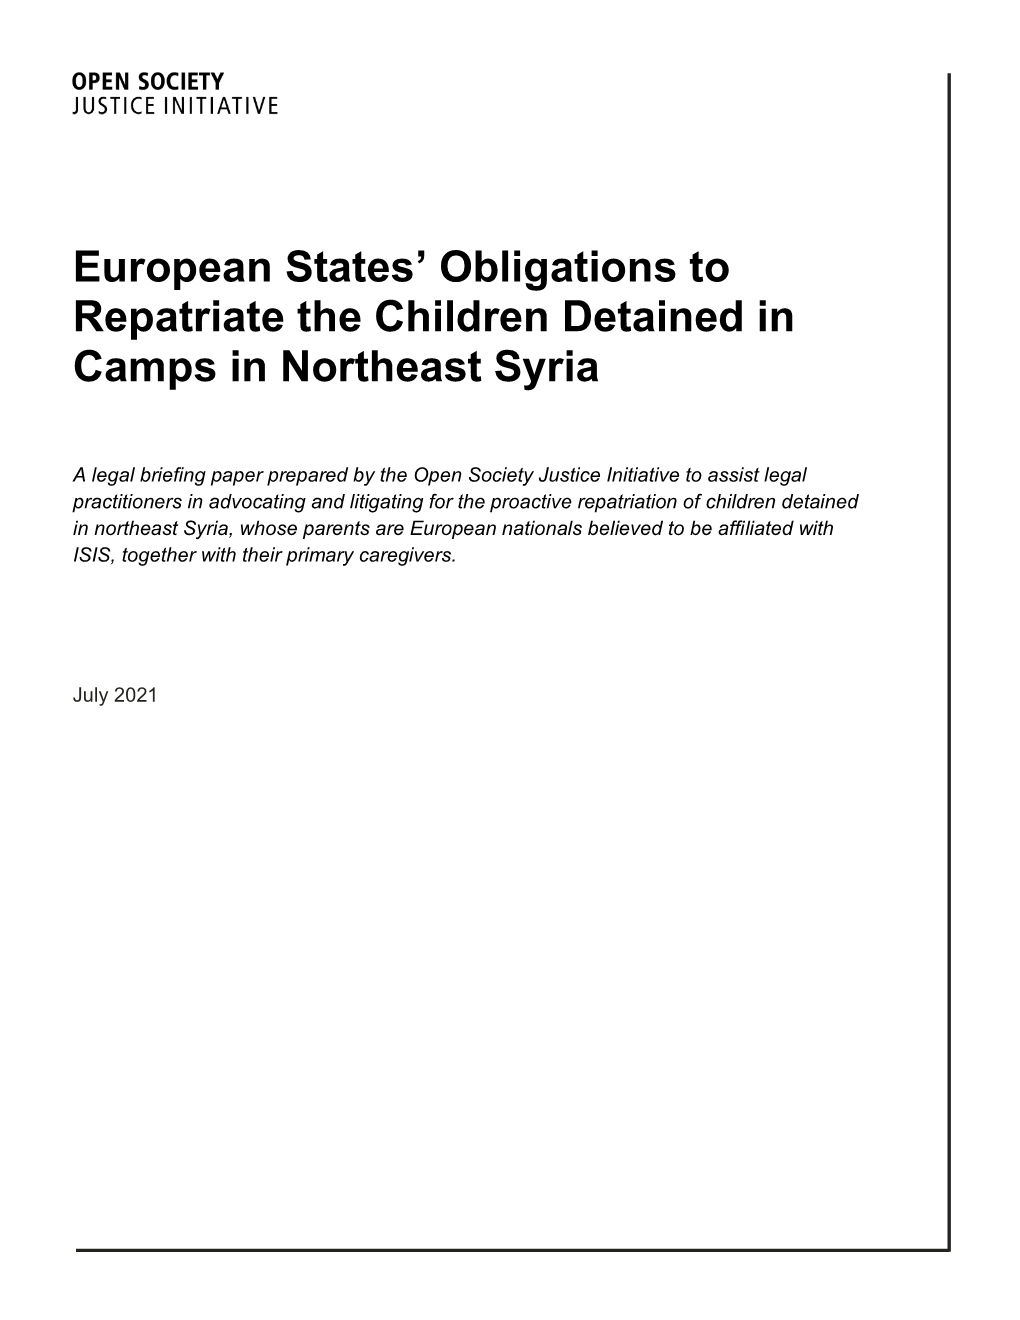 European States' Obligations to Repatriate the Children Detained In